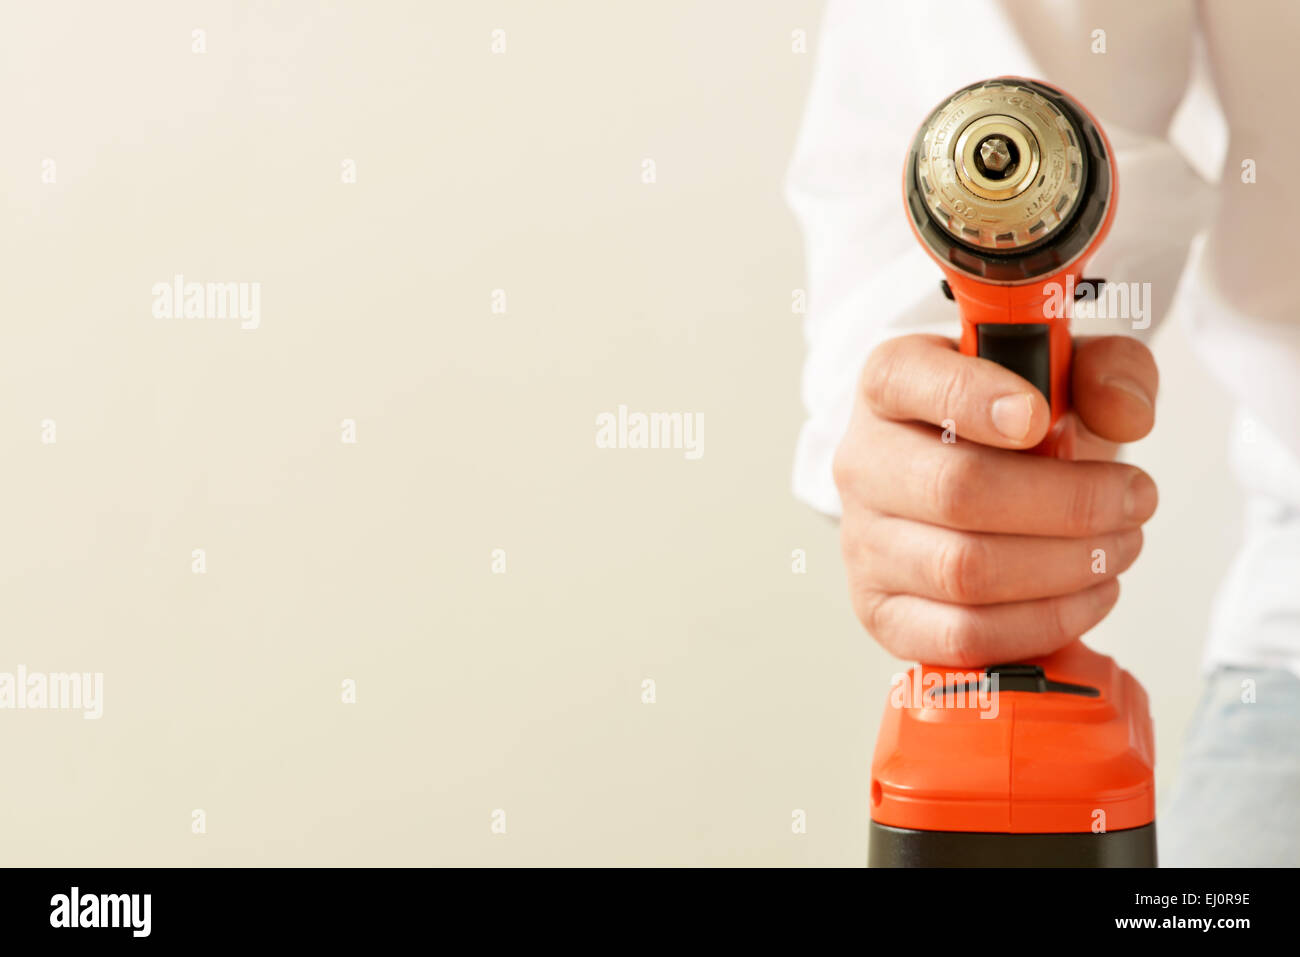 A battery powered screwdriver being held by a man Stock Photo